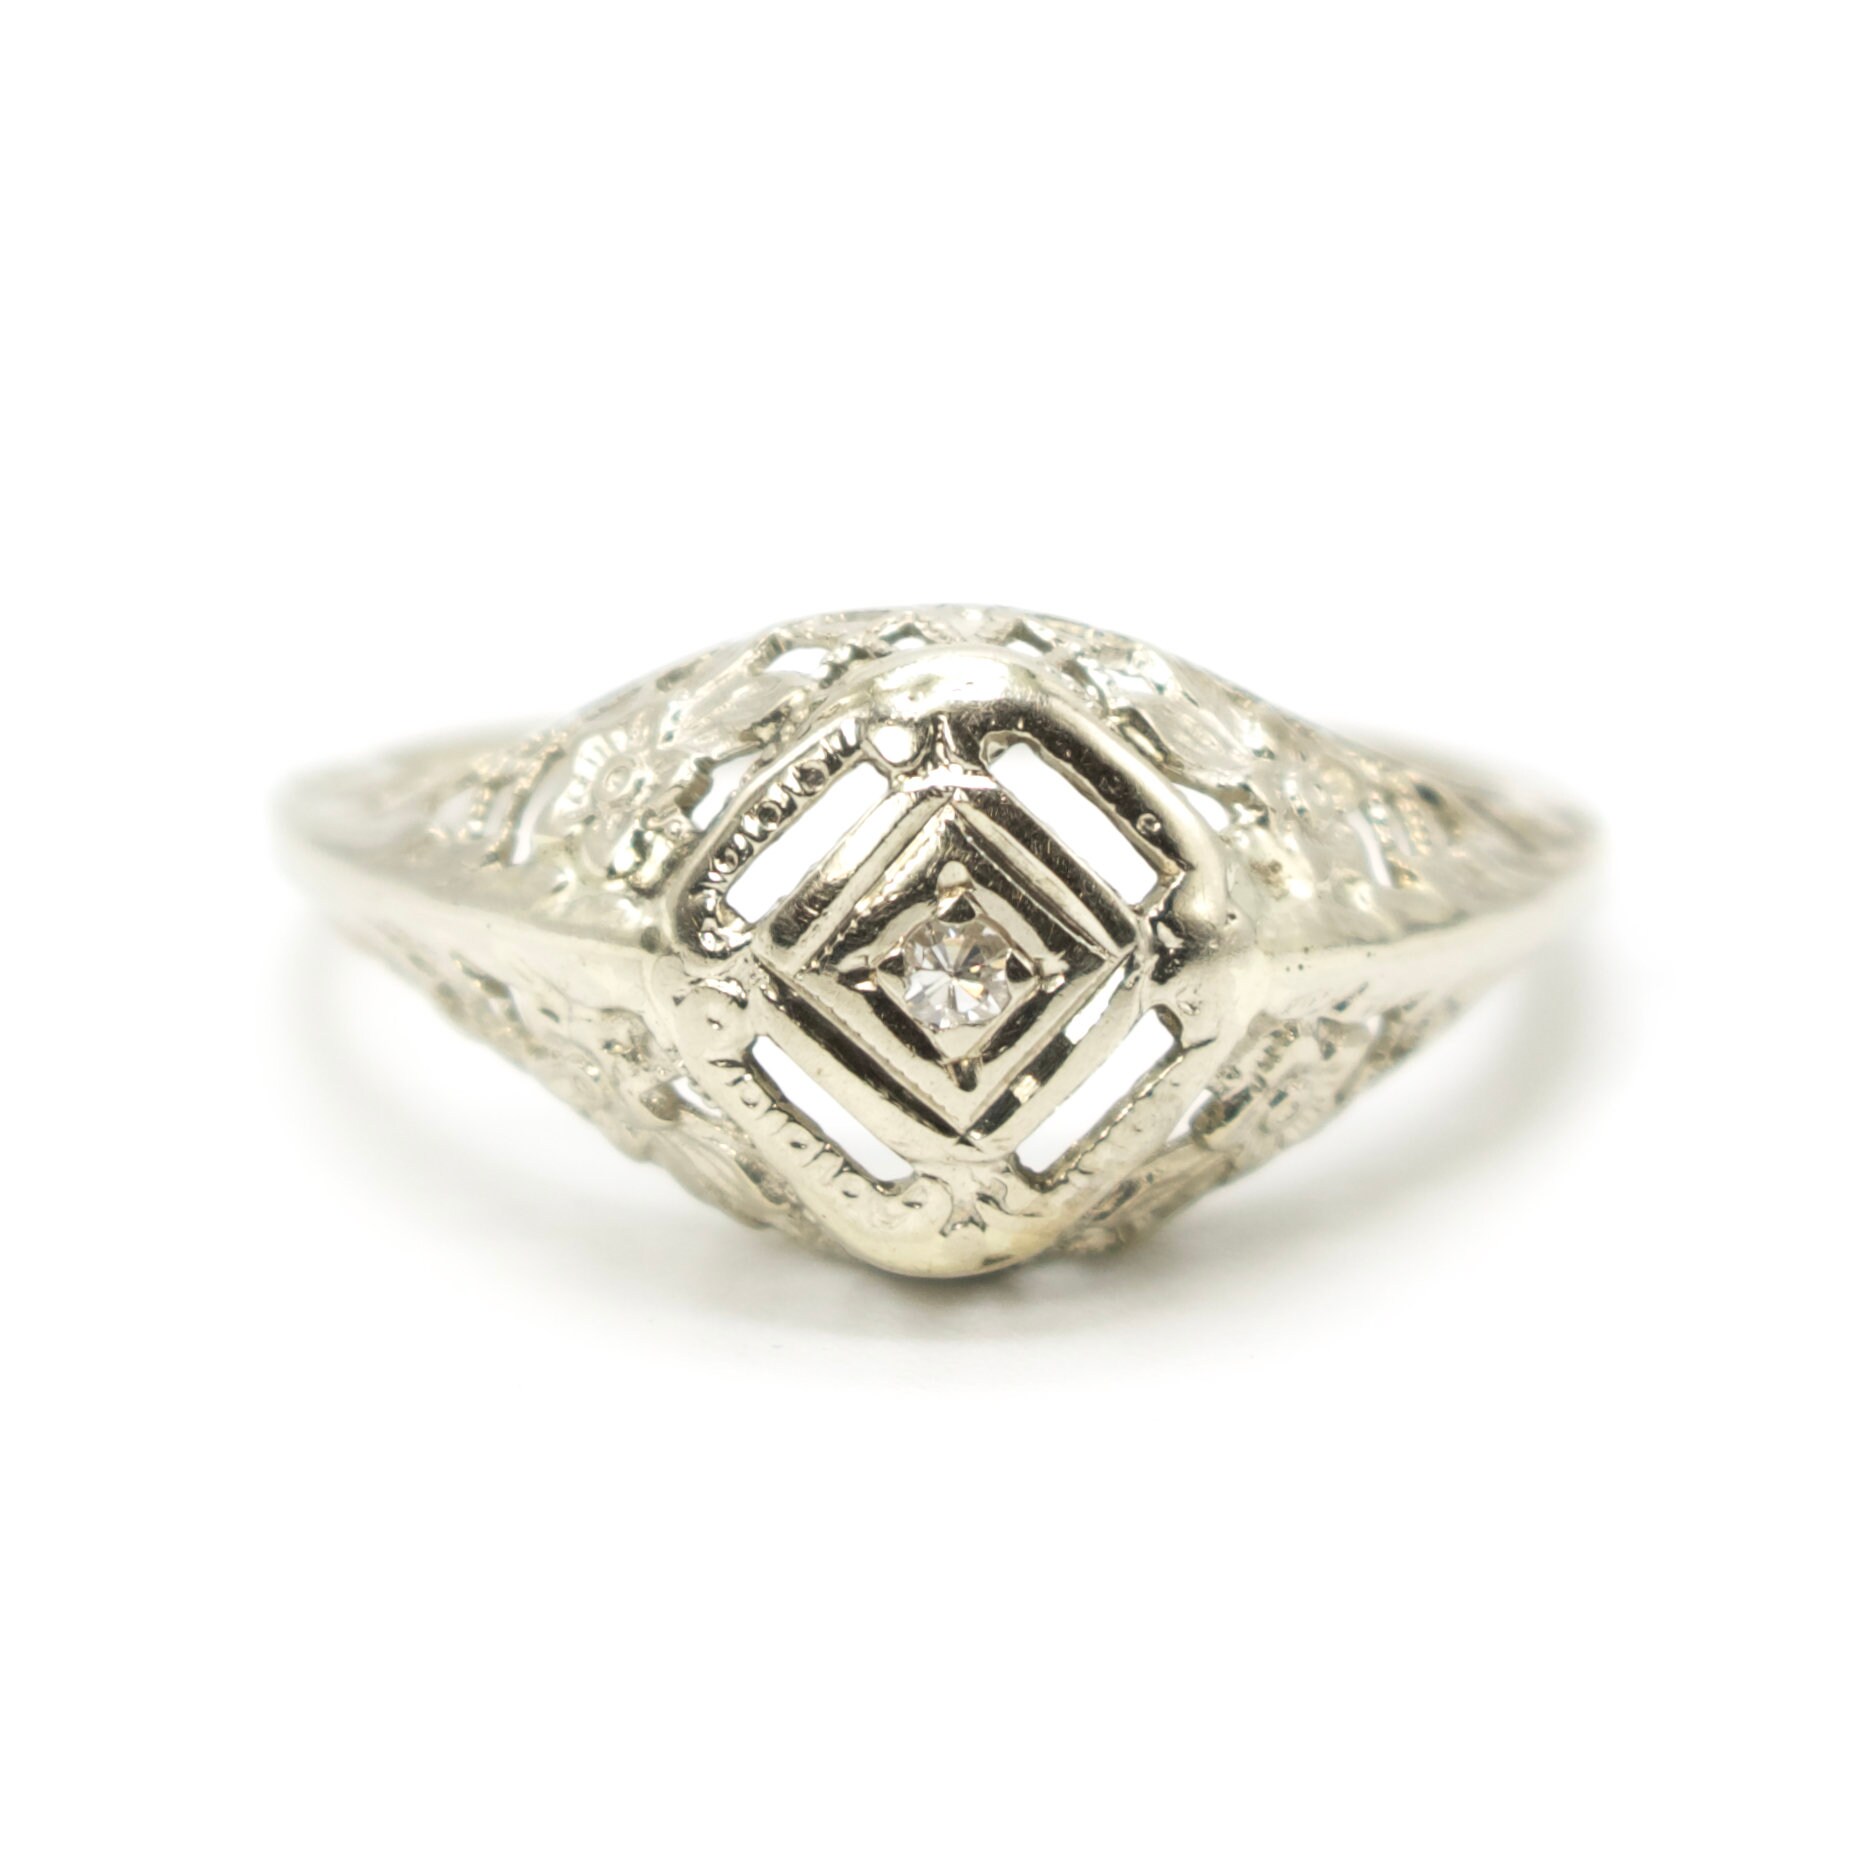 Charming Art Deco Filigree and Diamond Ring in White Gold - Etsy